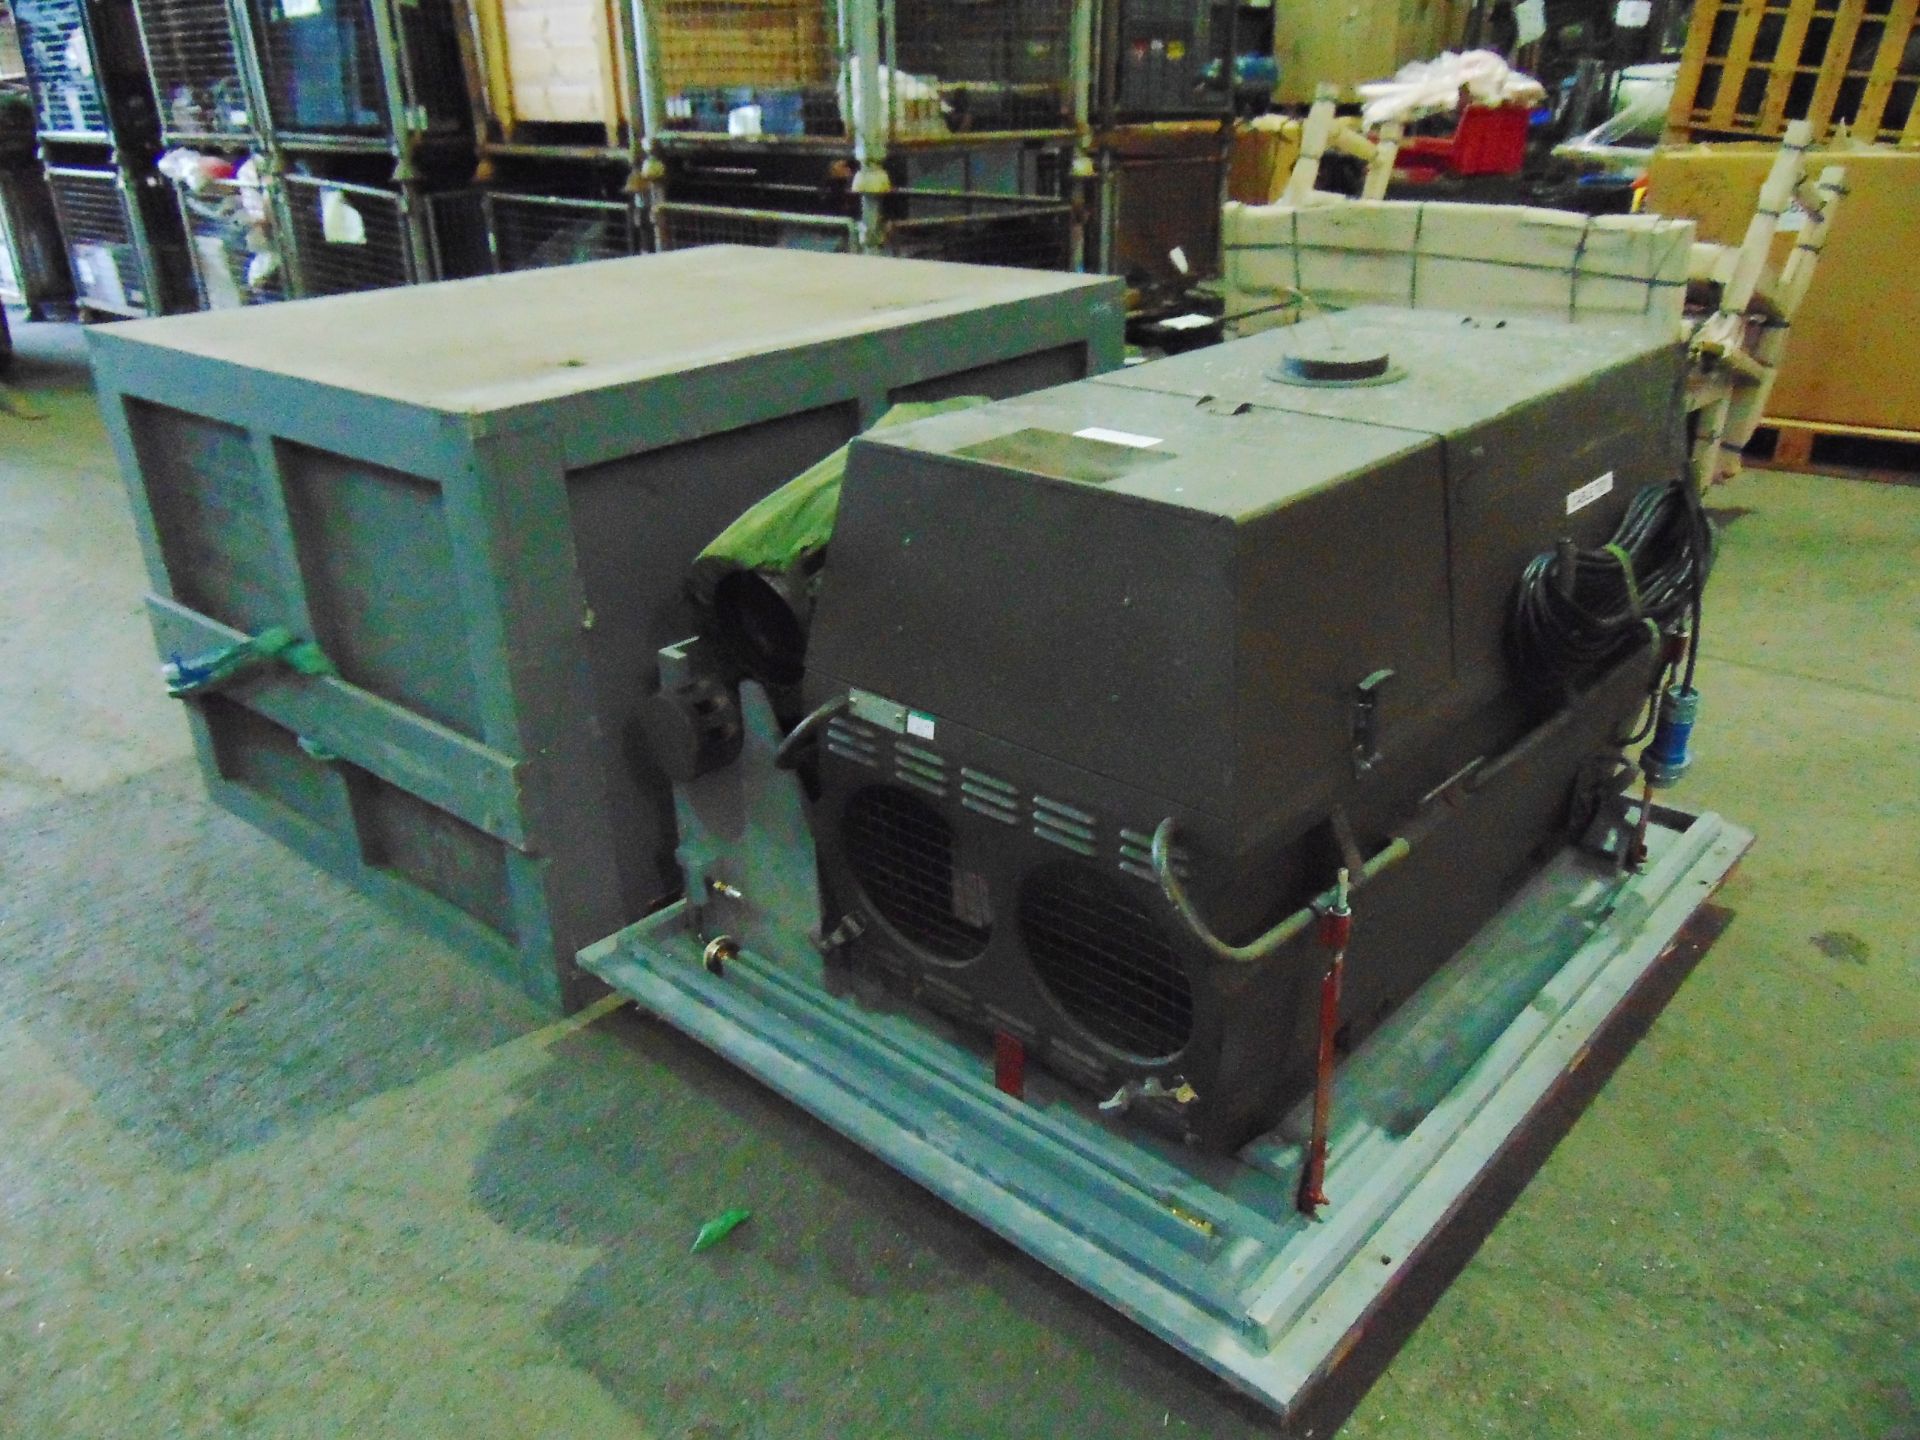 Direct from Reserve Stores a Dantherm VAM 40 Workshop Heater